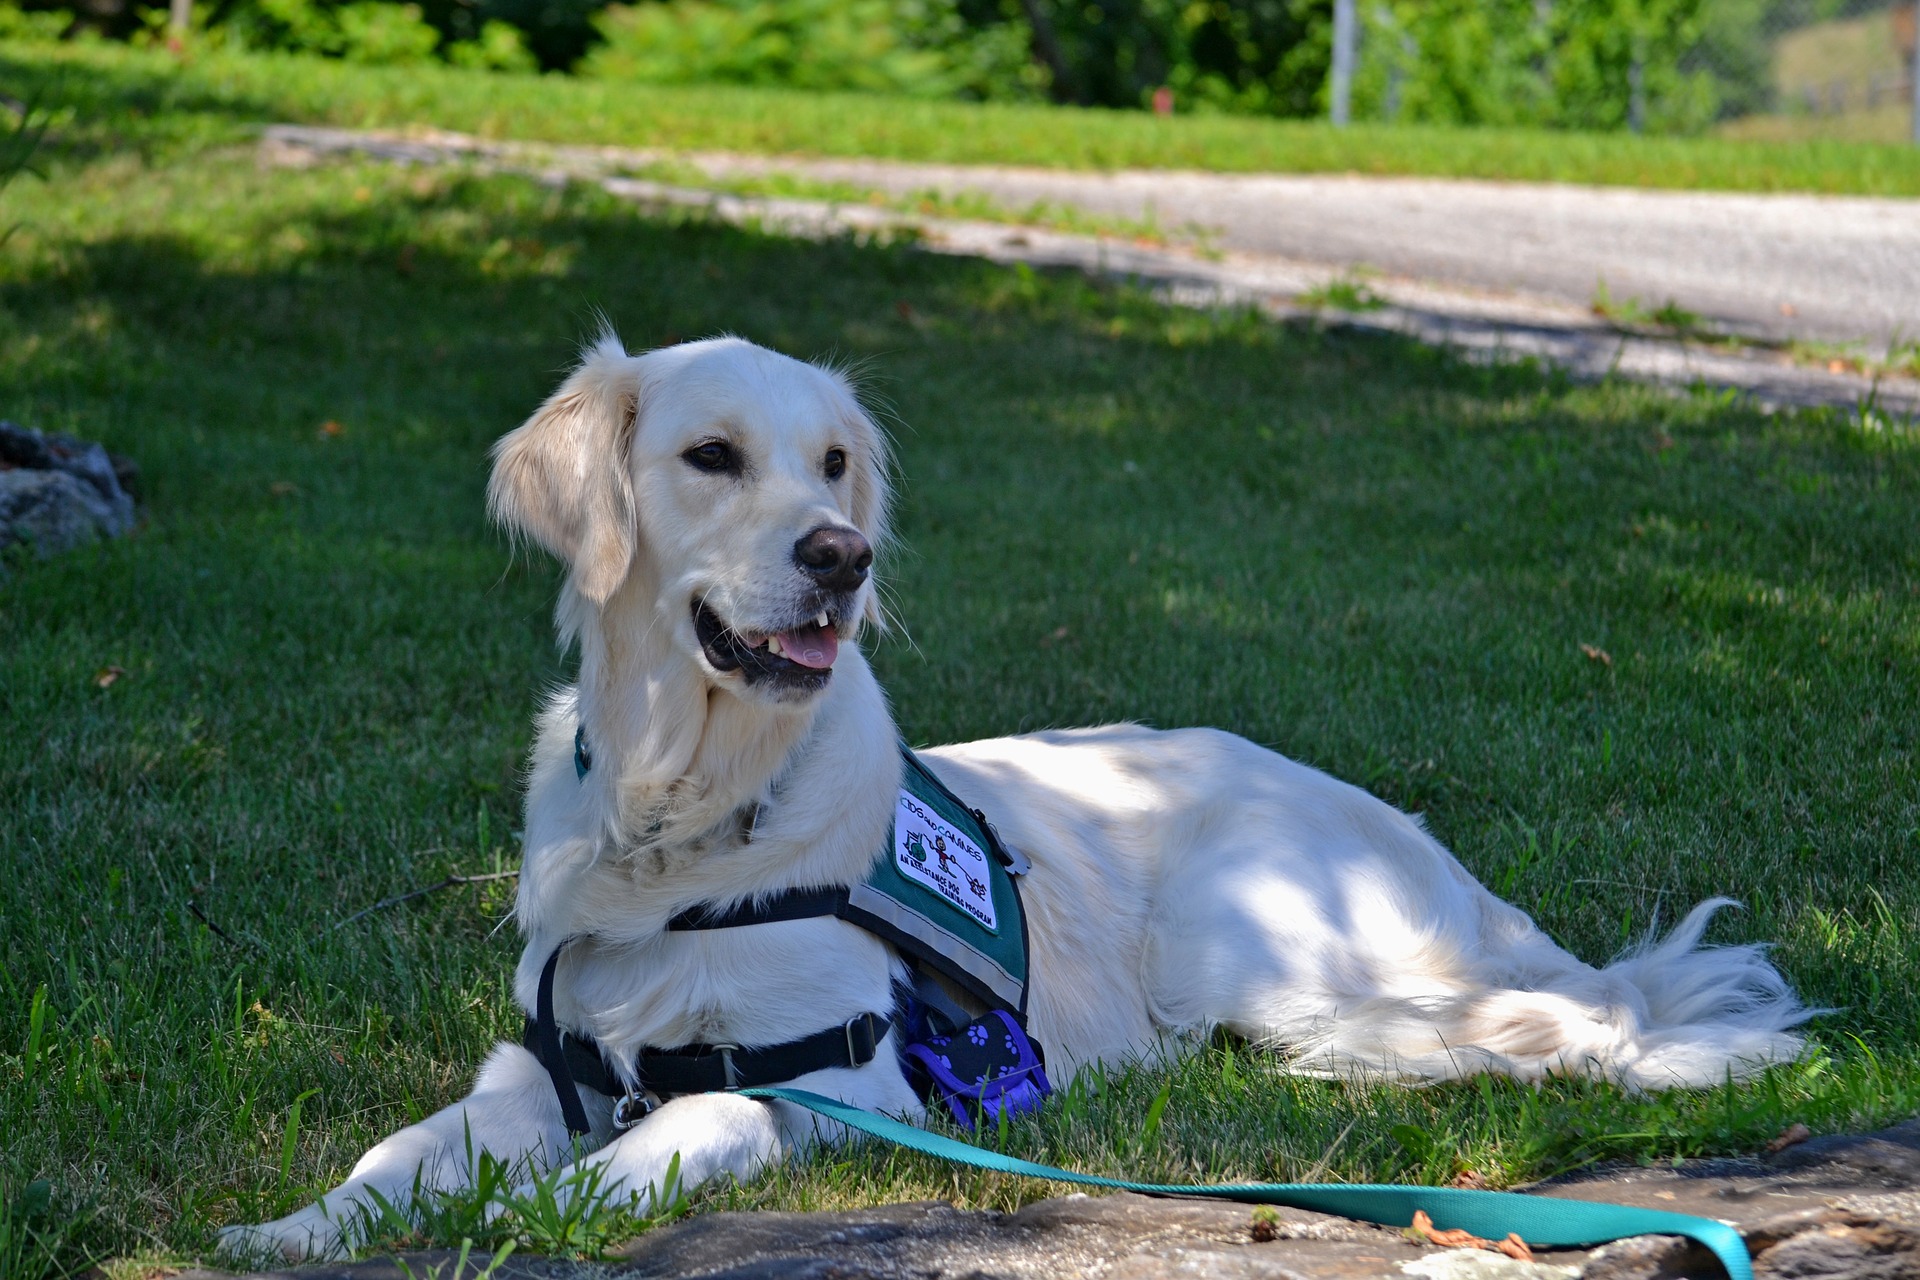 Can you be a doctor with a service dog?